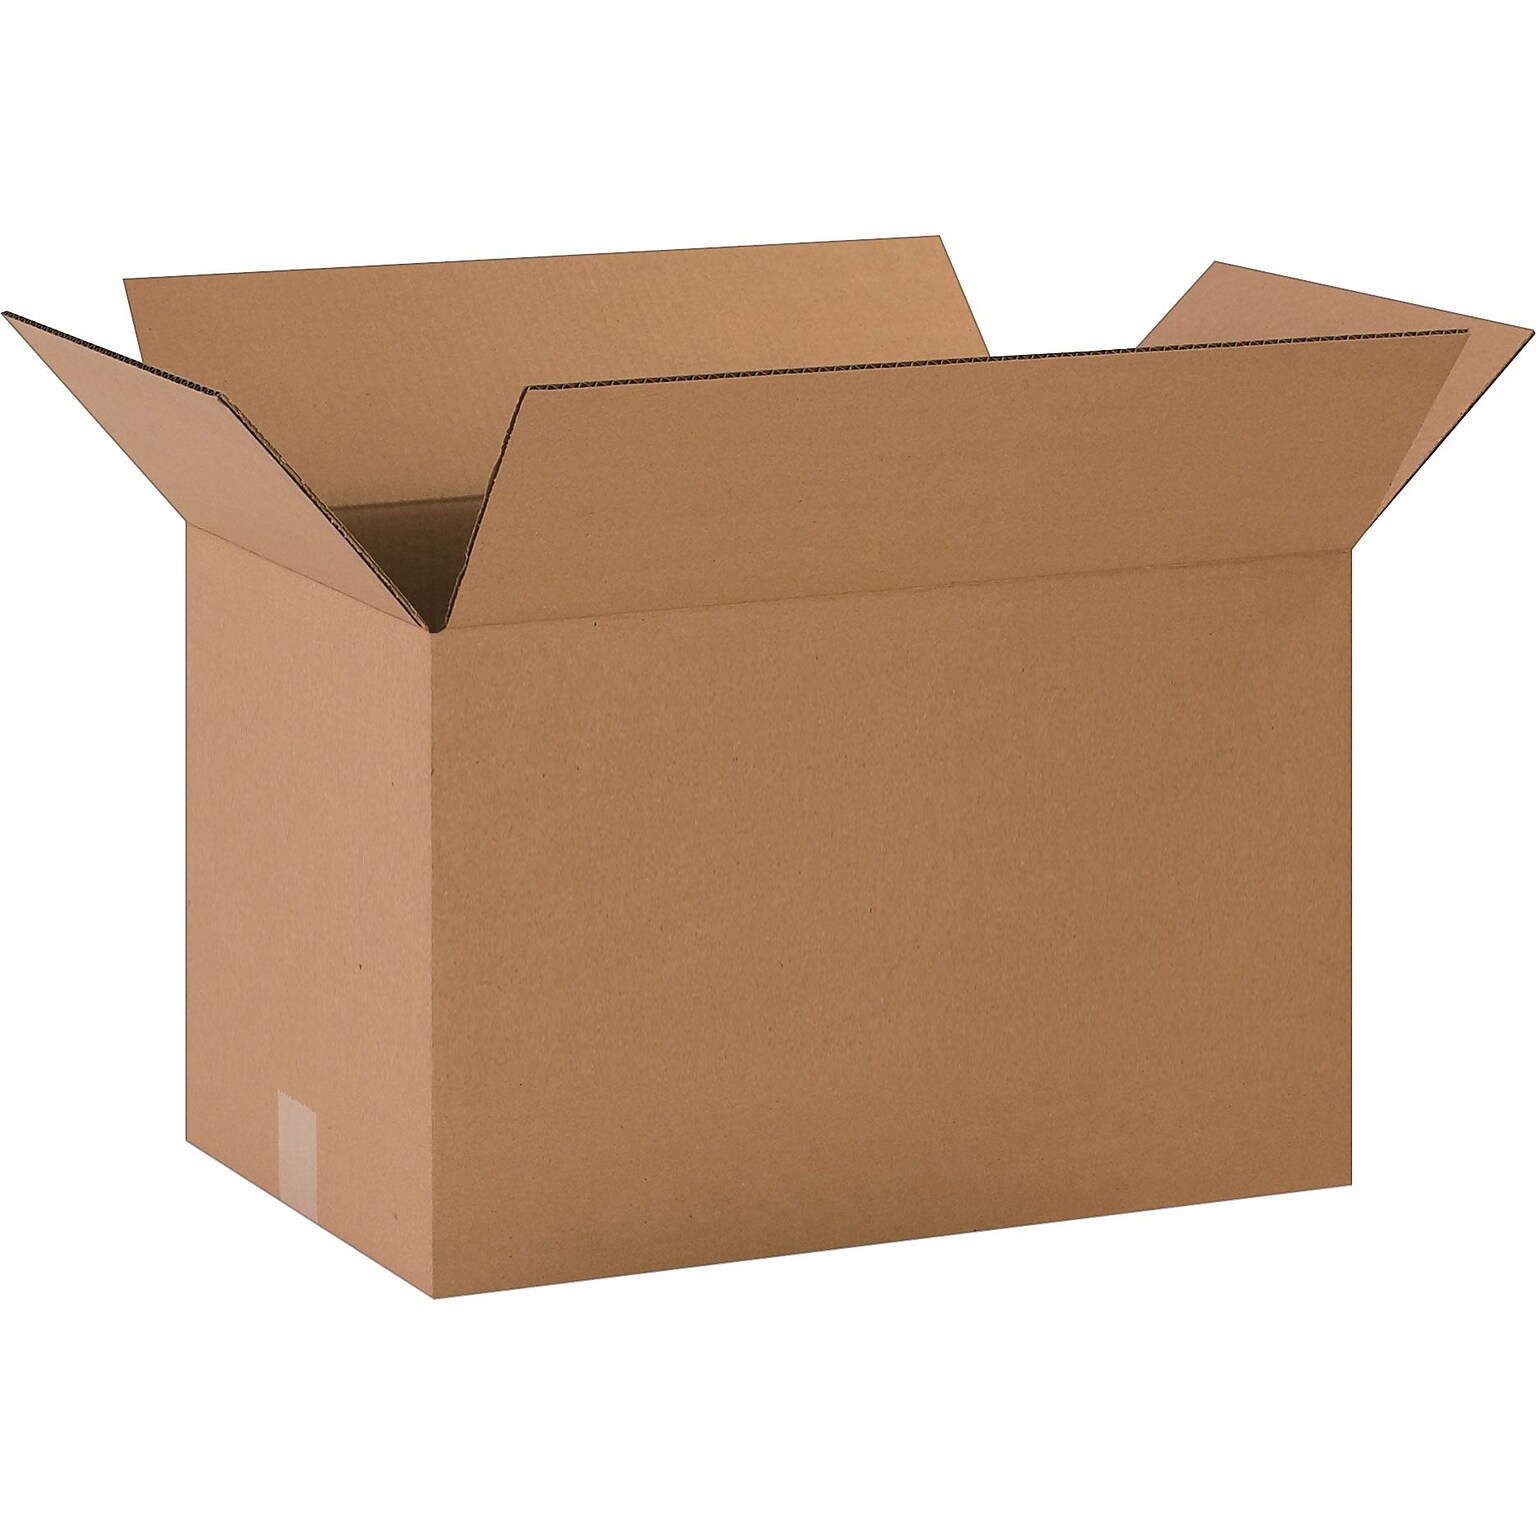 13 x 13 x 4, 32 ECT, Shipping Boxes